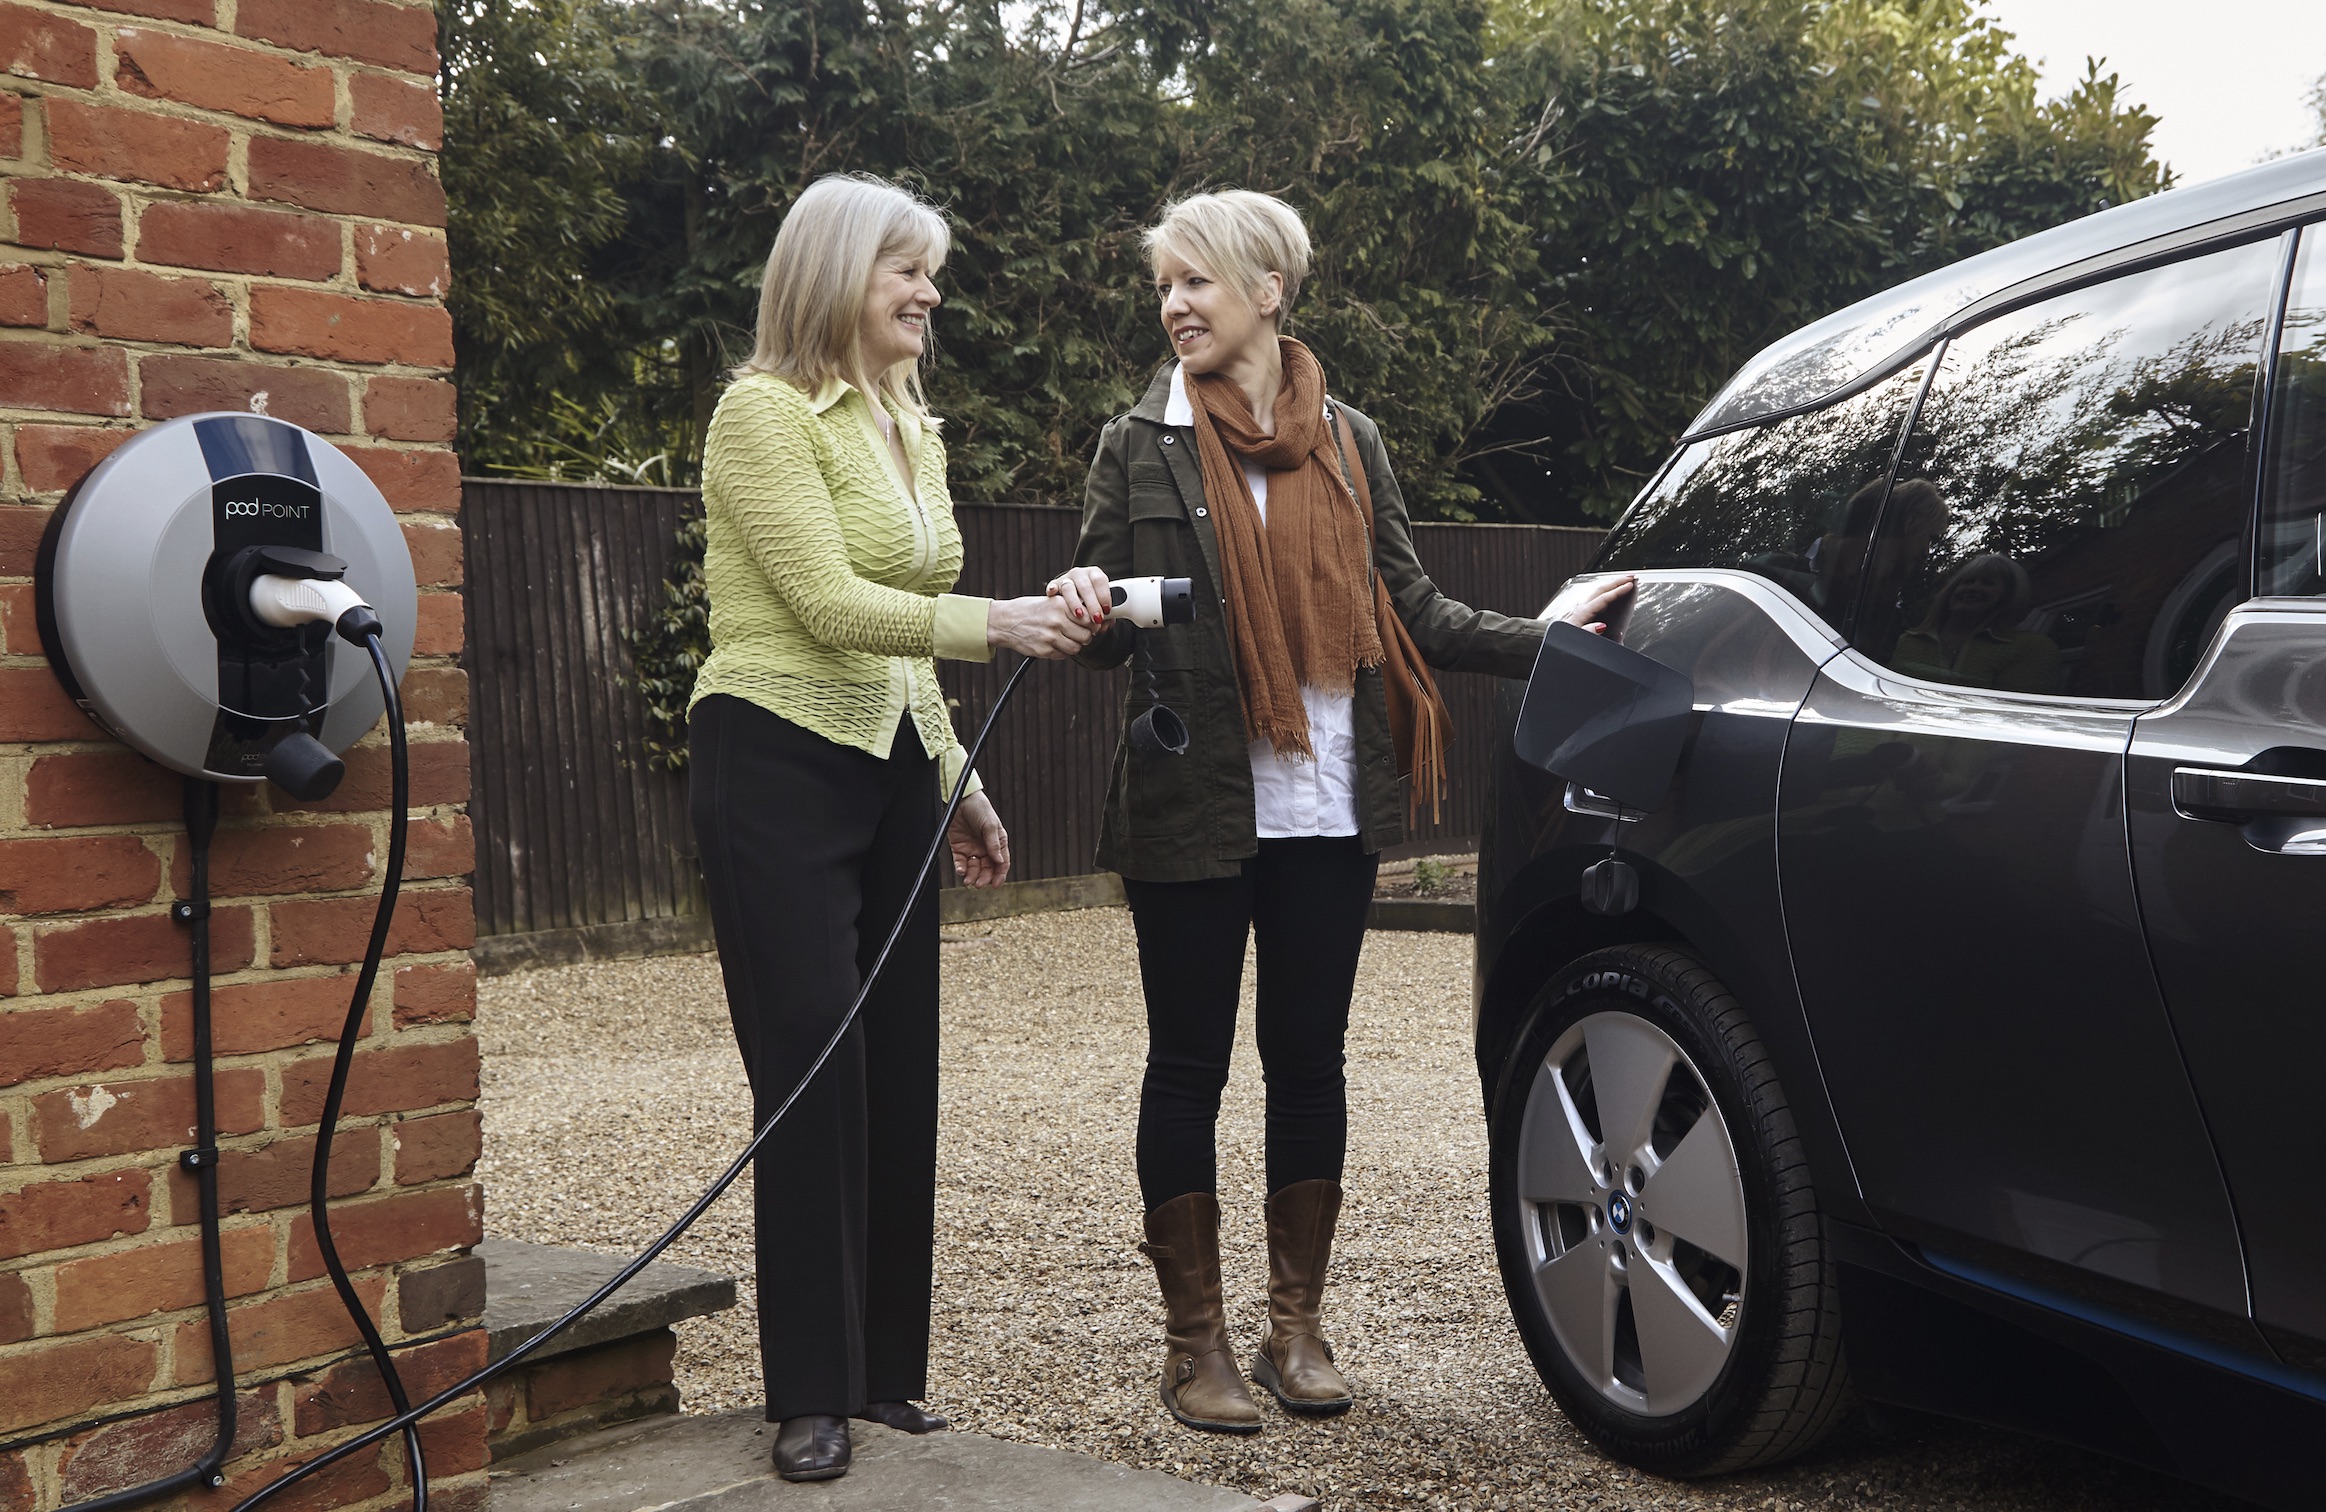 Chargie app connects electriccar drivers, UK homeowners; 'AirBnB' for